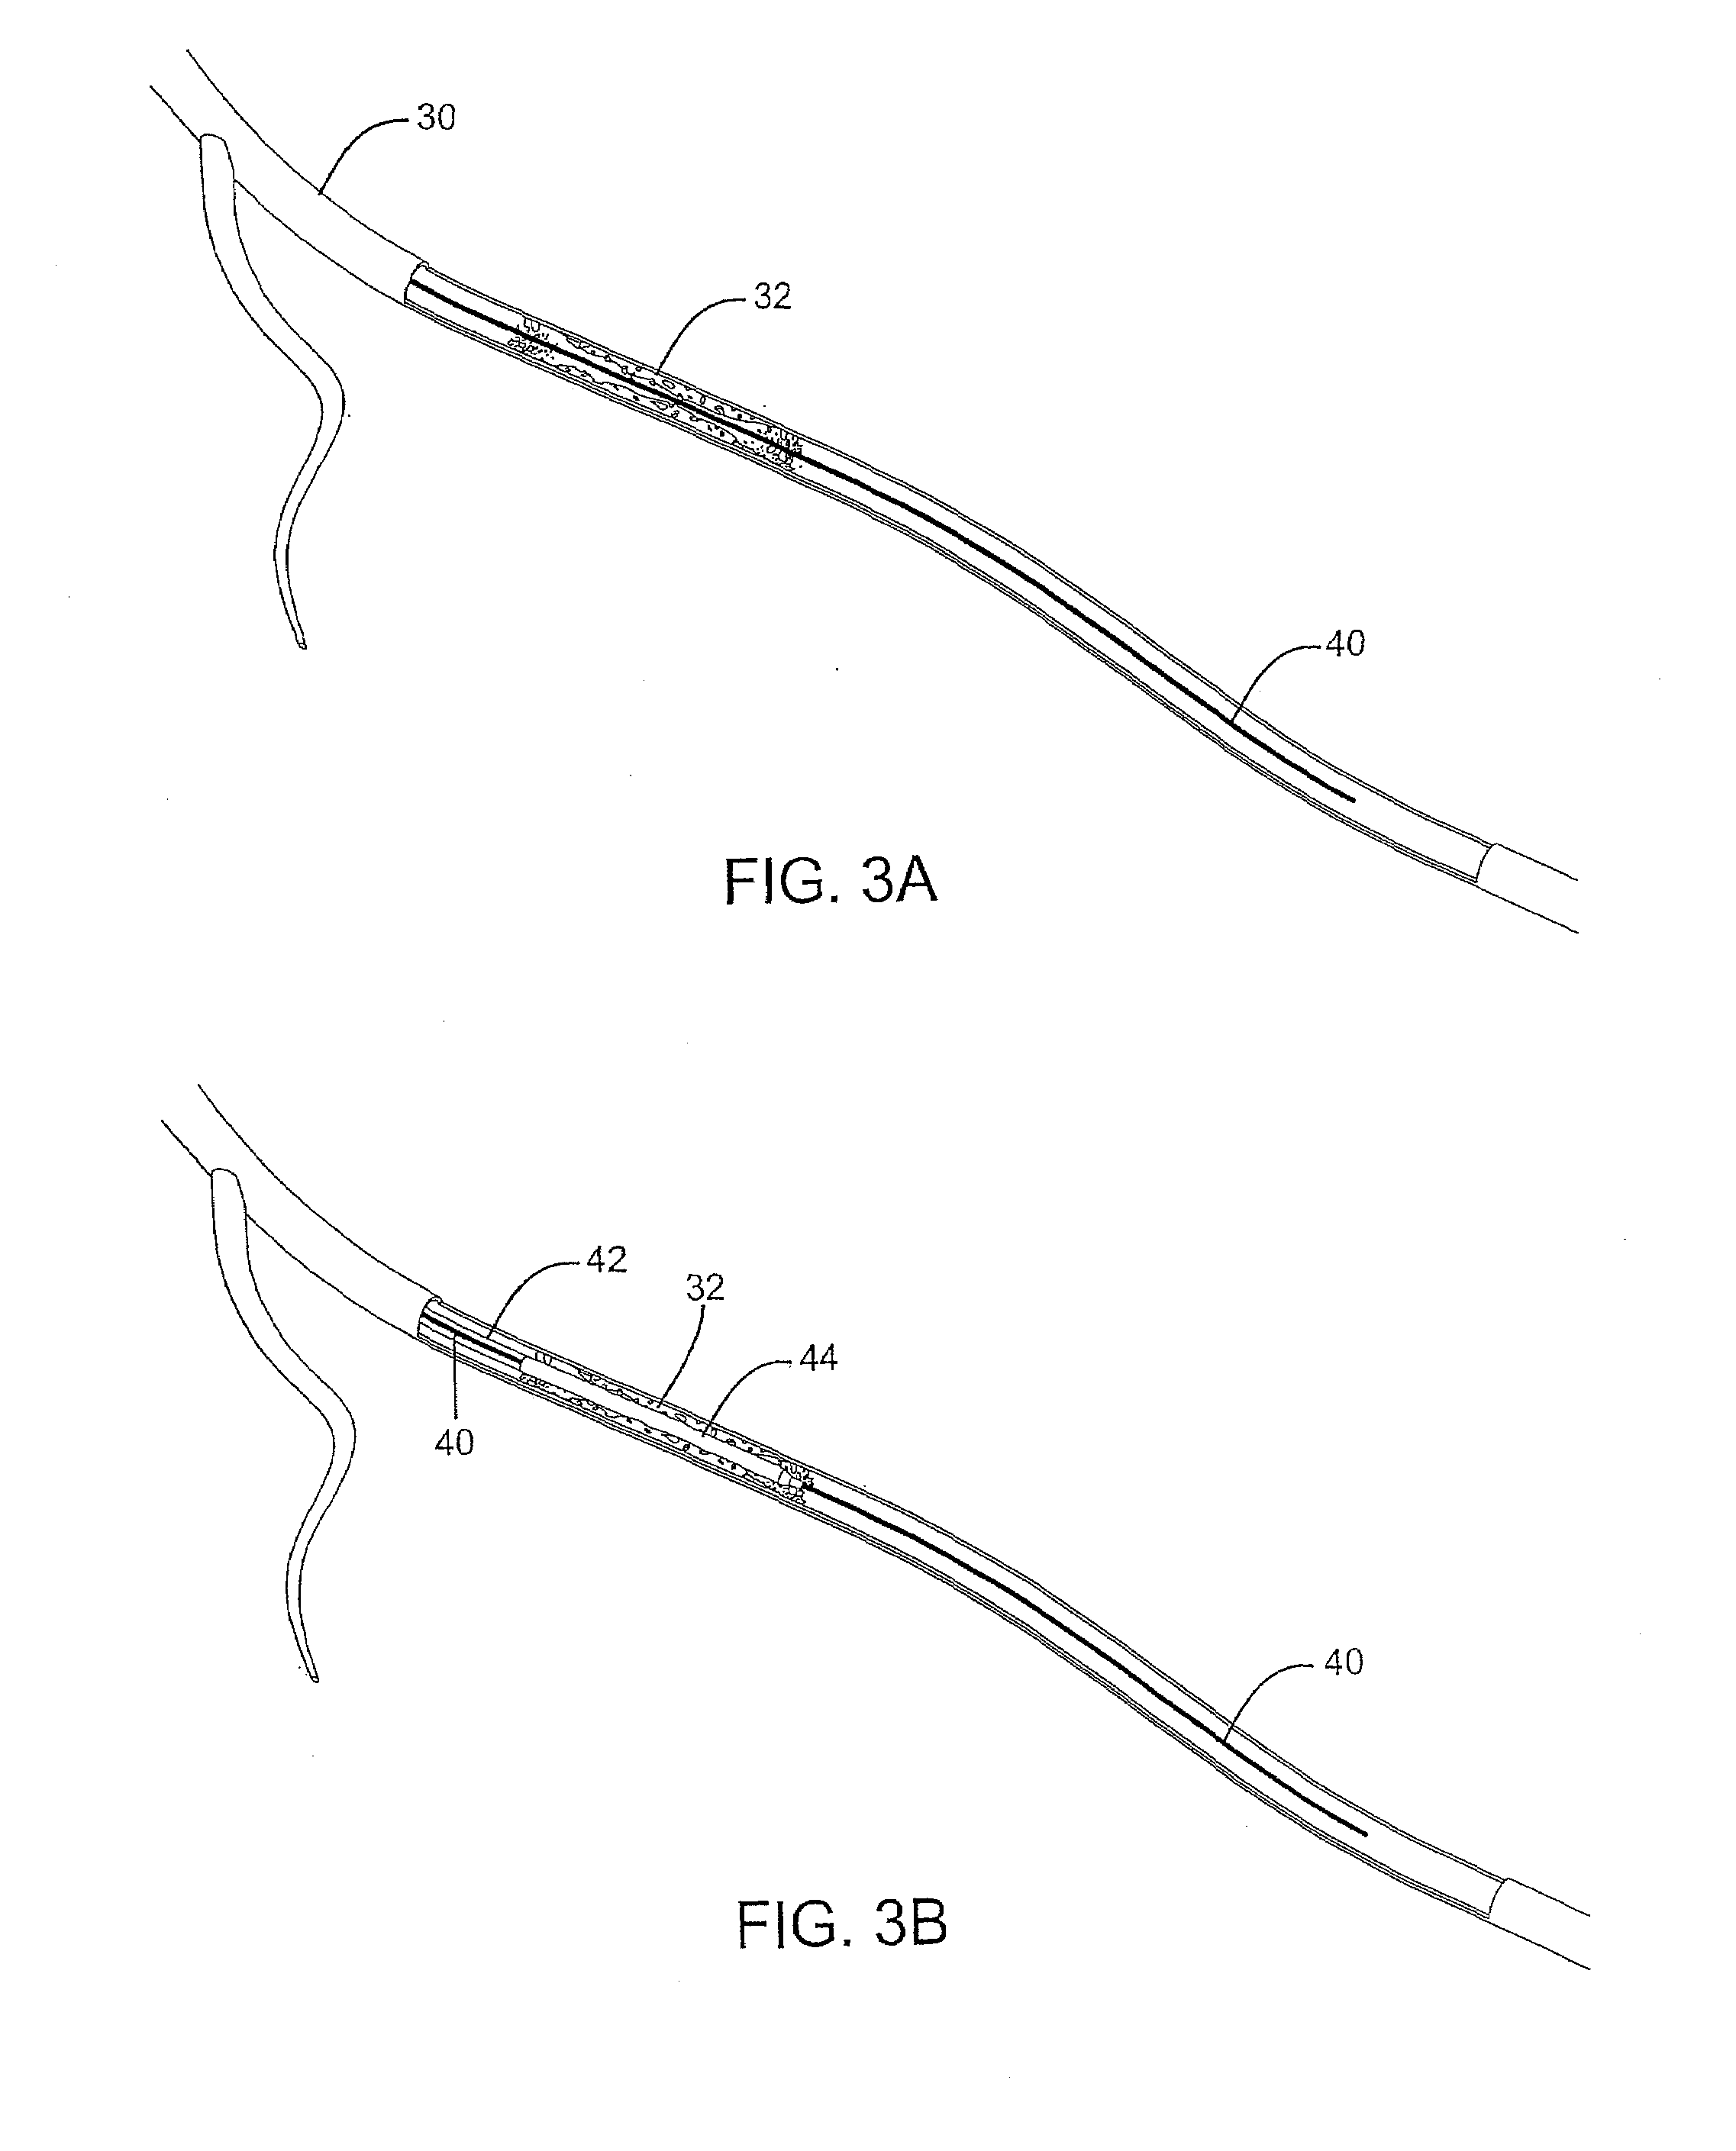 Sliding restraint stent delivery systems